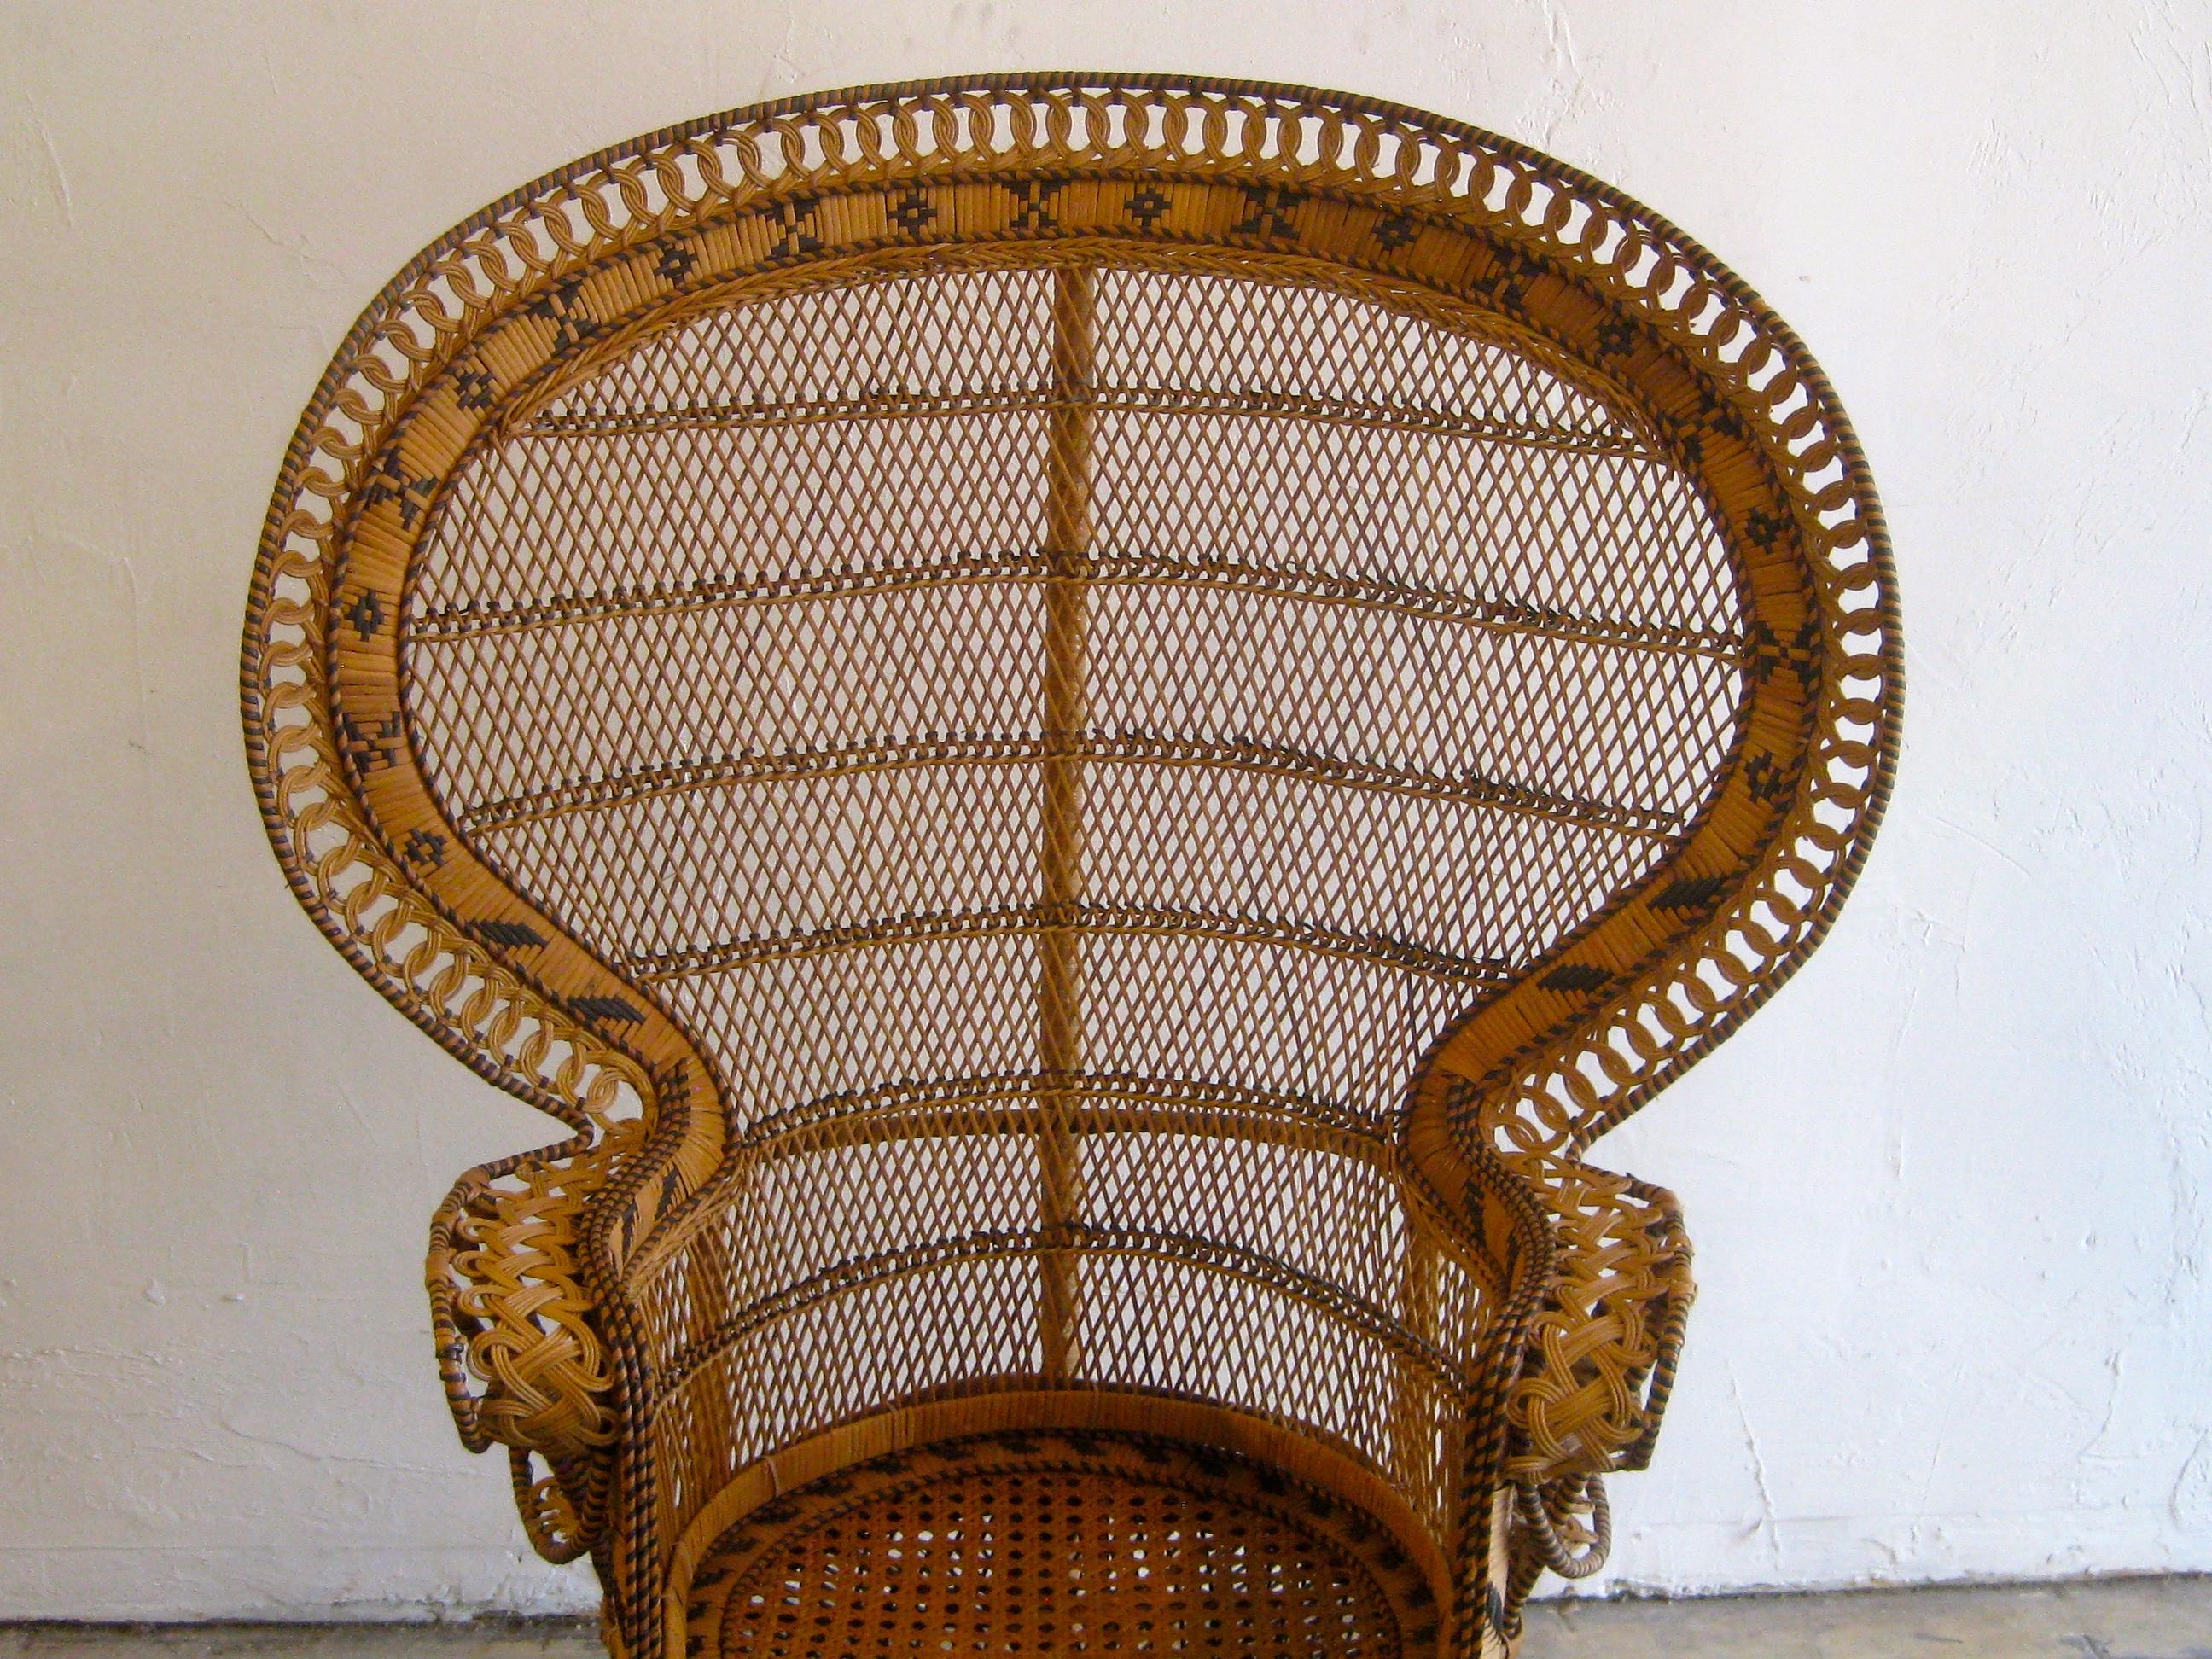 Iconic Emmanuelle wicker and rattan midcentury peacock chair. This chair is a statement piece and in excellent original condition. It has no broken, no brittle or repaired pieces. Displays well and is very strong. The color is awesome and would work